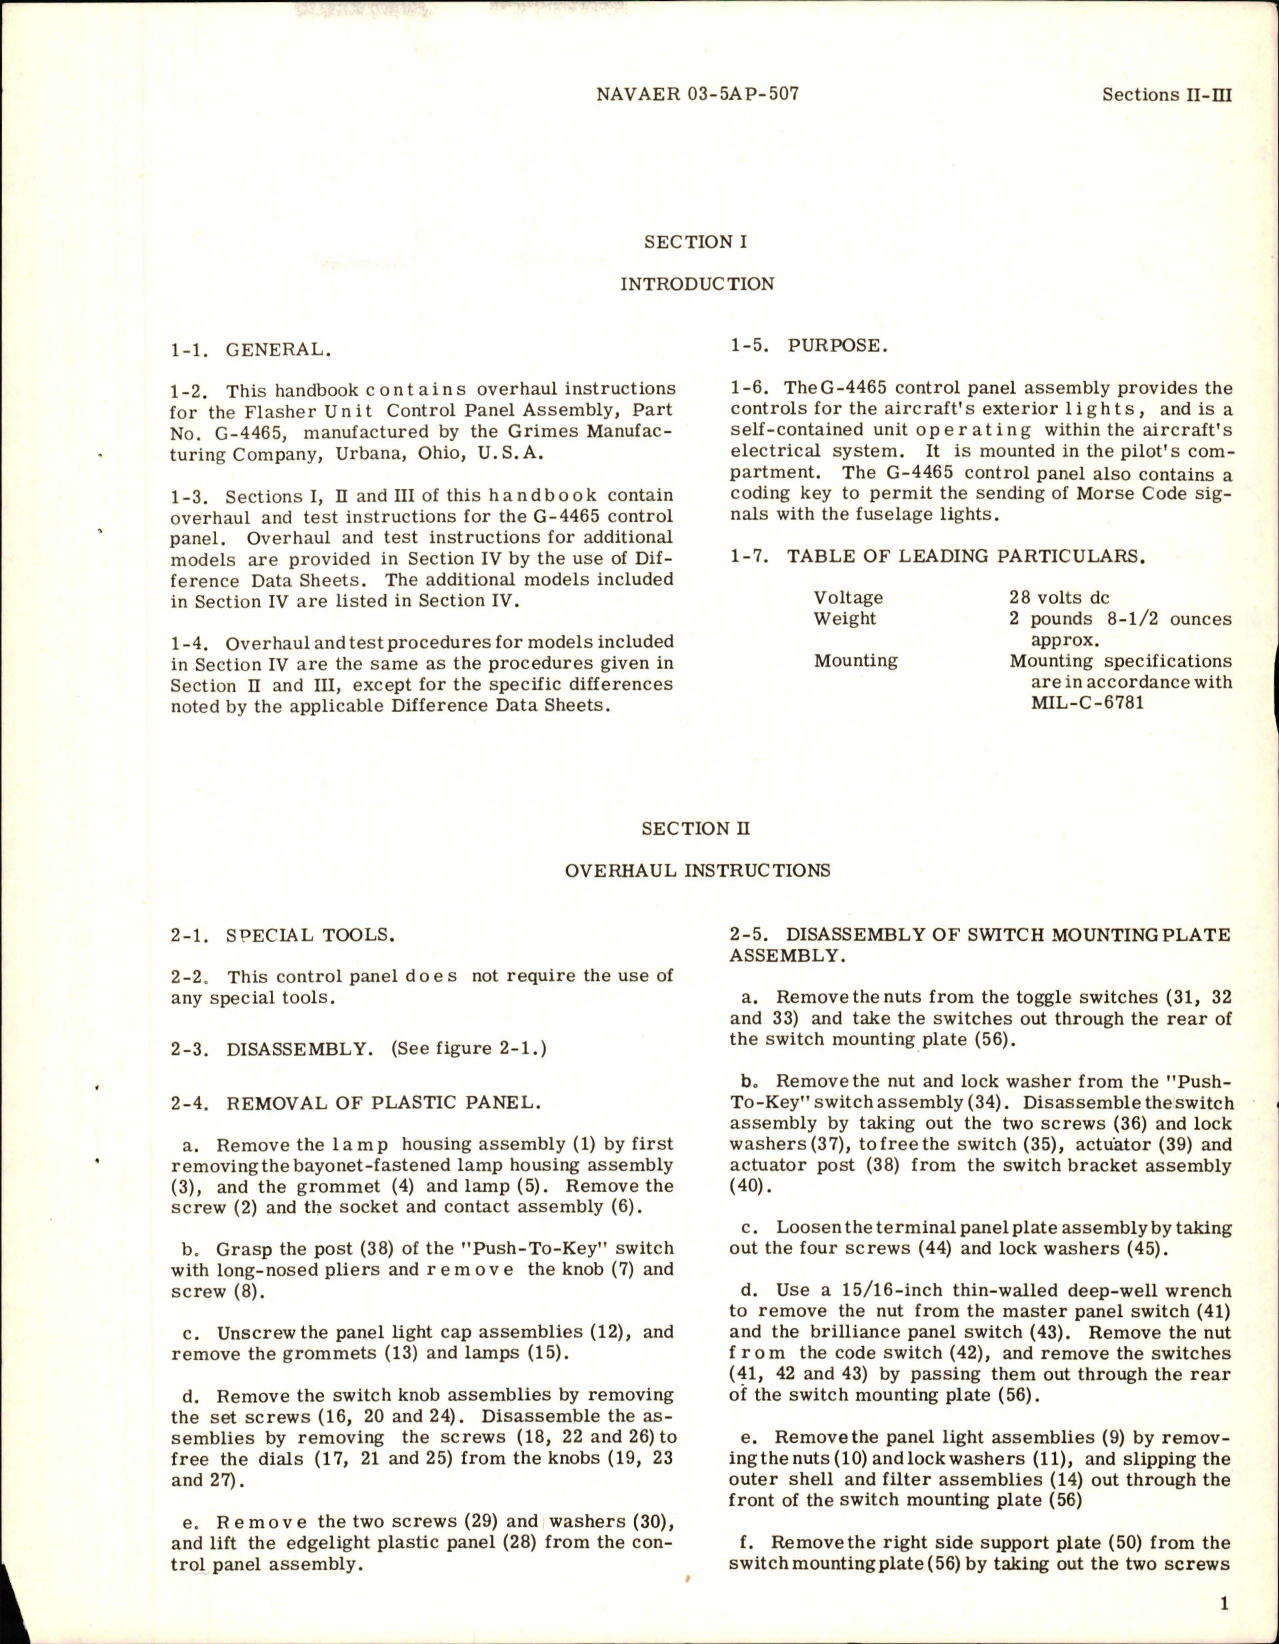 Sample page 5 from AirCorps Library document: Overhaul Instructions for Flasher Unit Control Panel Assembly - Part G-4465